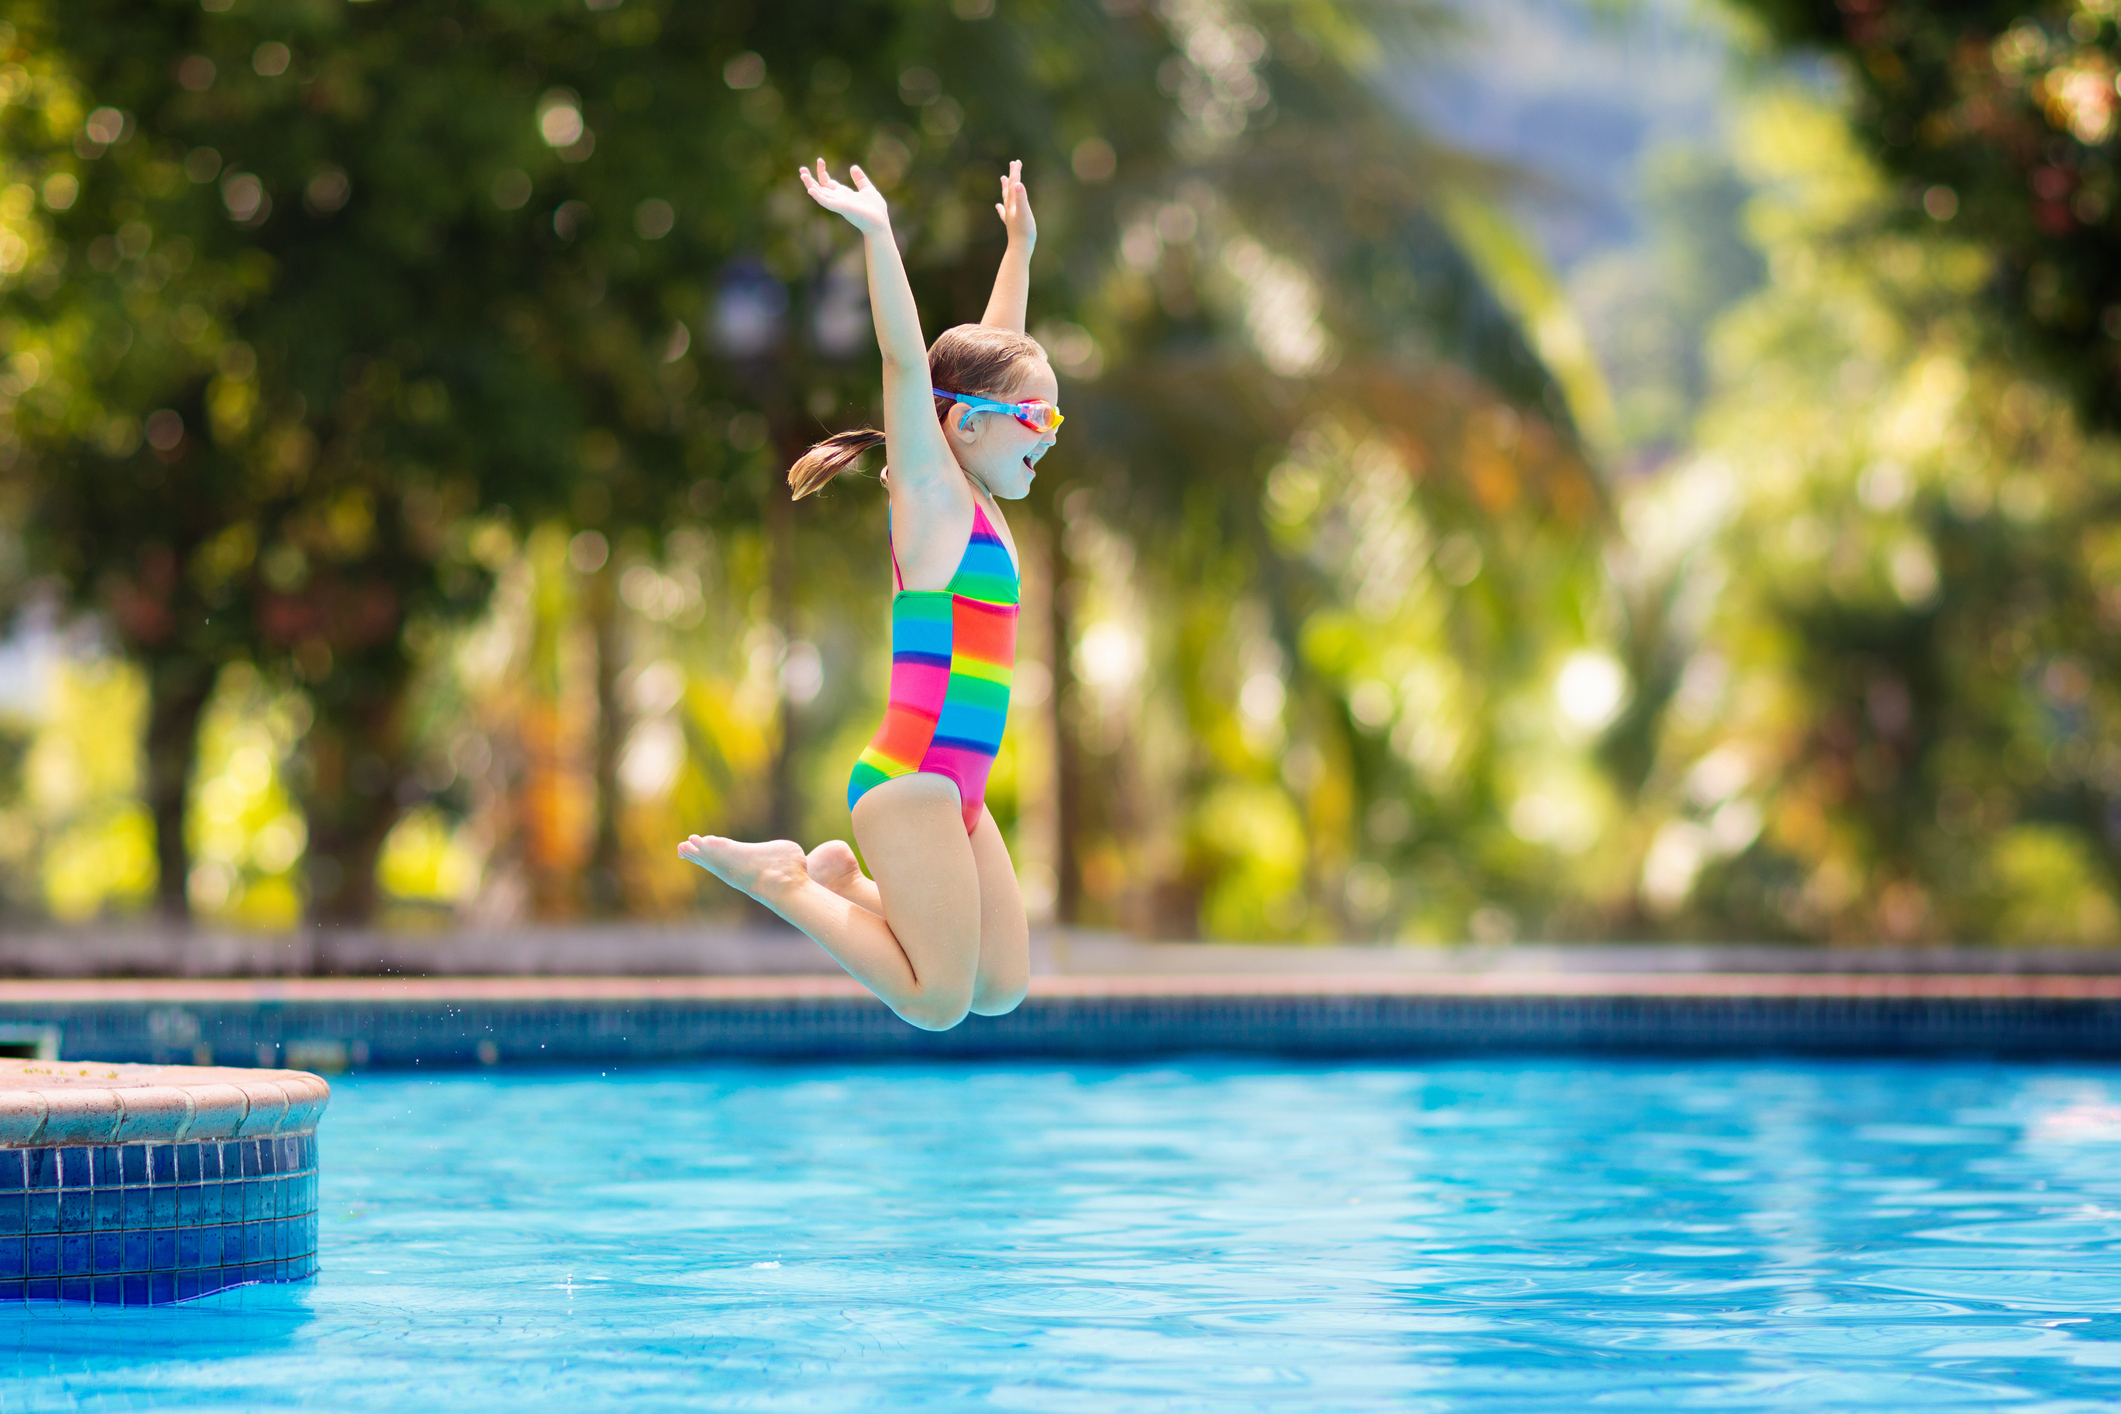 What are the safest swimsuit colors? : Inside Children's Blog